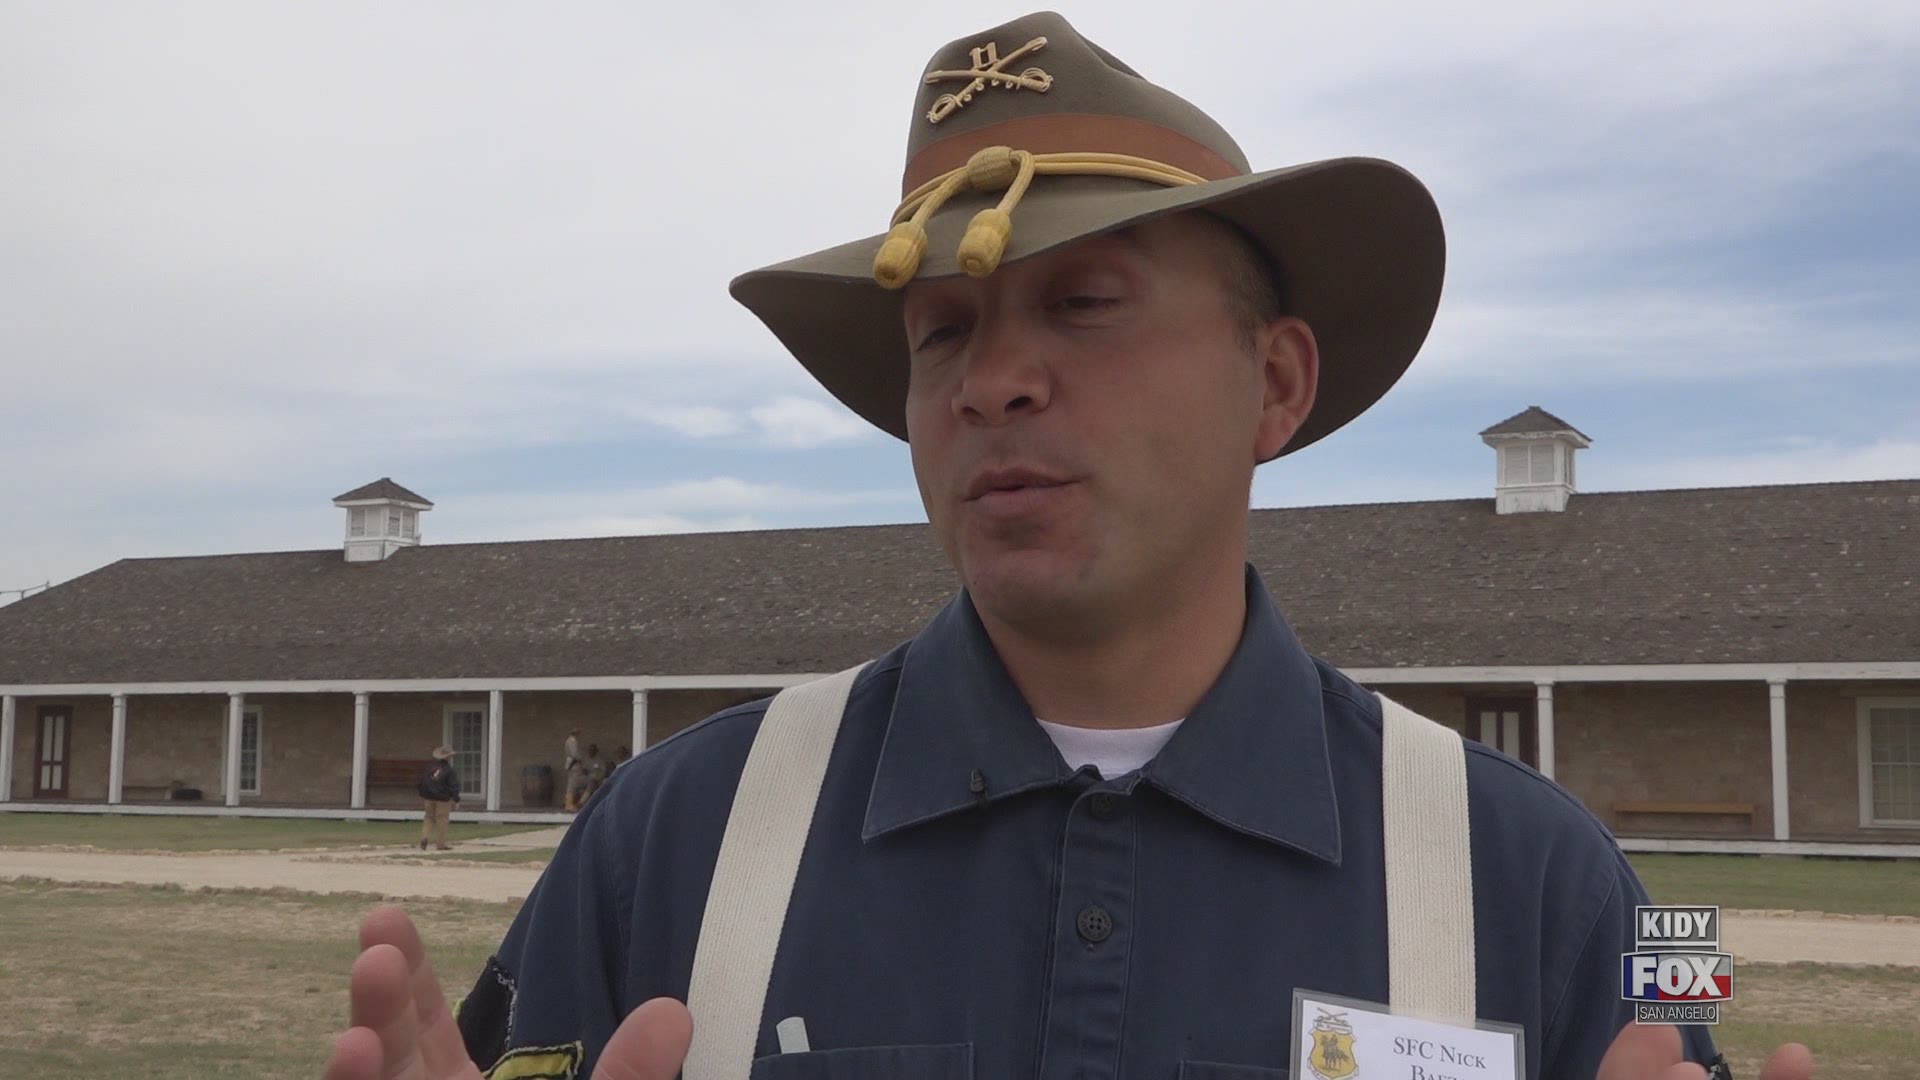 The third annual regional cavalry competition began today at Fort Concho. This year 24 riders are saddling up to compete for the Hesse cup, a trophy which will be given to the winner of the competition this Saturday. Our Brenda Matute spoke to one sol